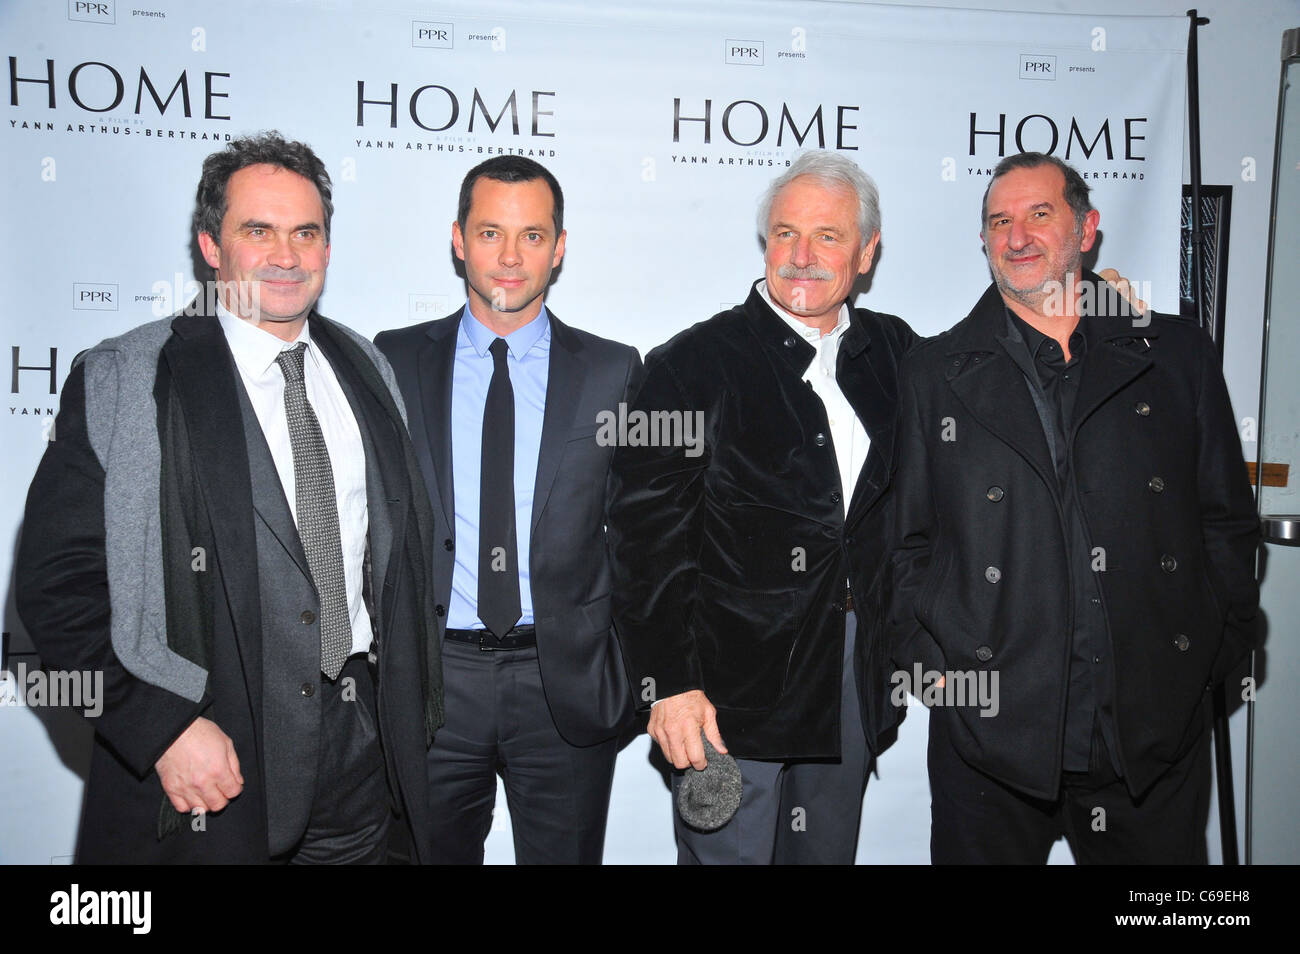 Denis Carot, Laurent Claquin, Yann Arthus-Bertrand, Armand Amar in attendance for HOME Premiere Screening and Cocktail Reception, Directors Guild of America (DGA) Theater, New York, NY February 1, 2011. Photo By: Gregorio T. Binuya/Everett Collection Stock Photo